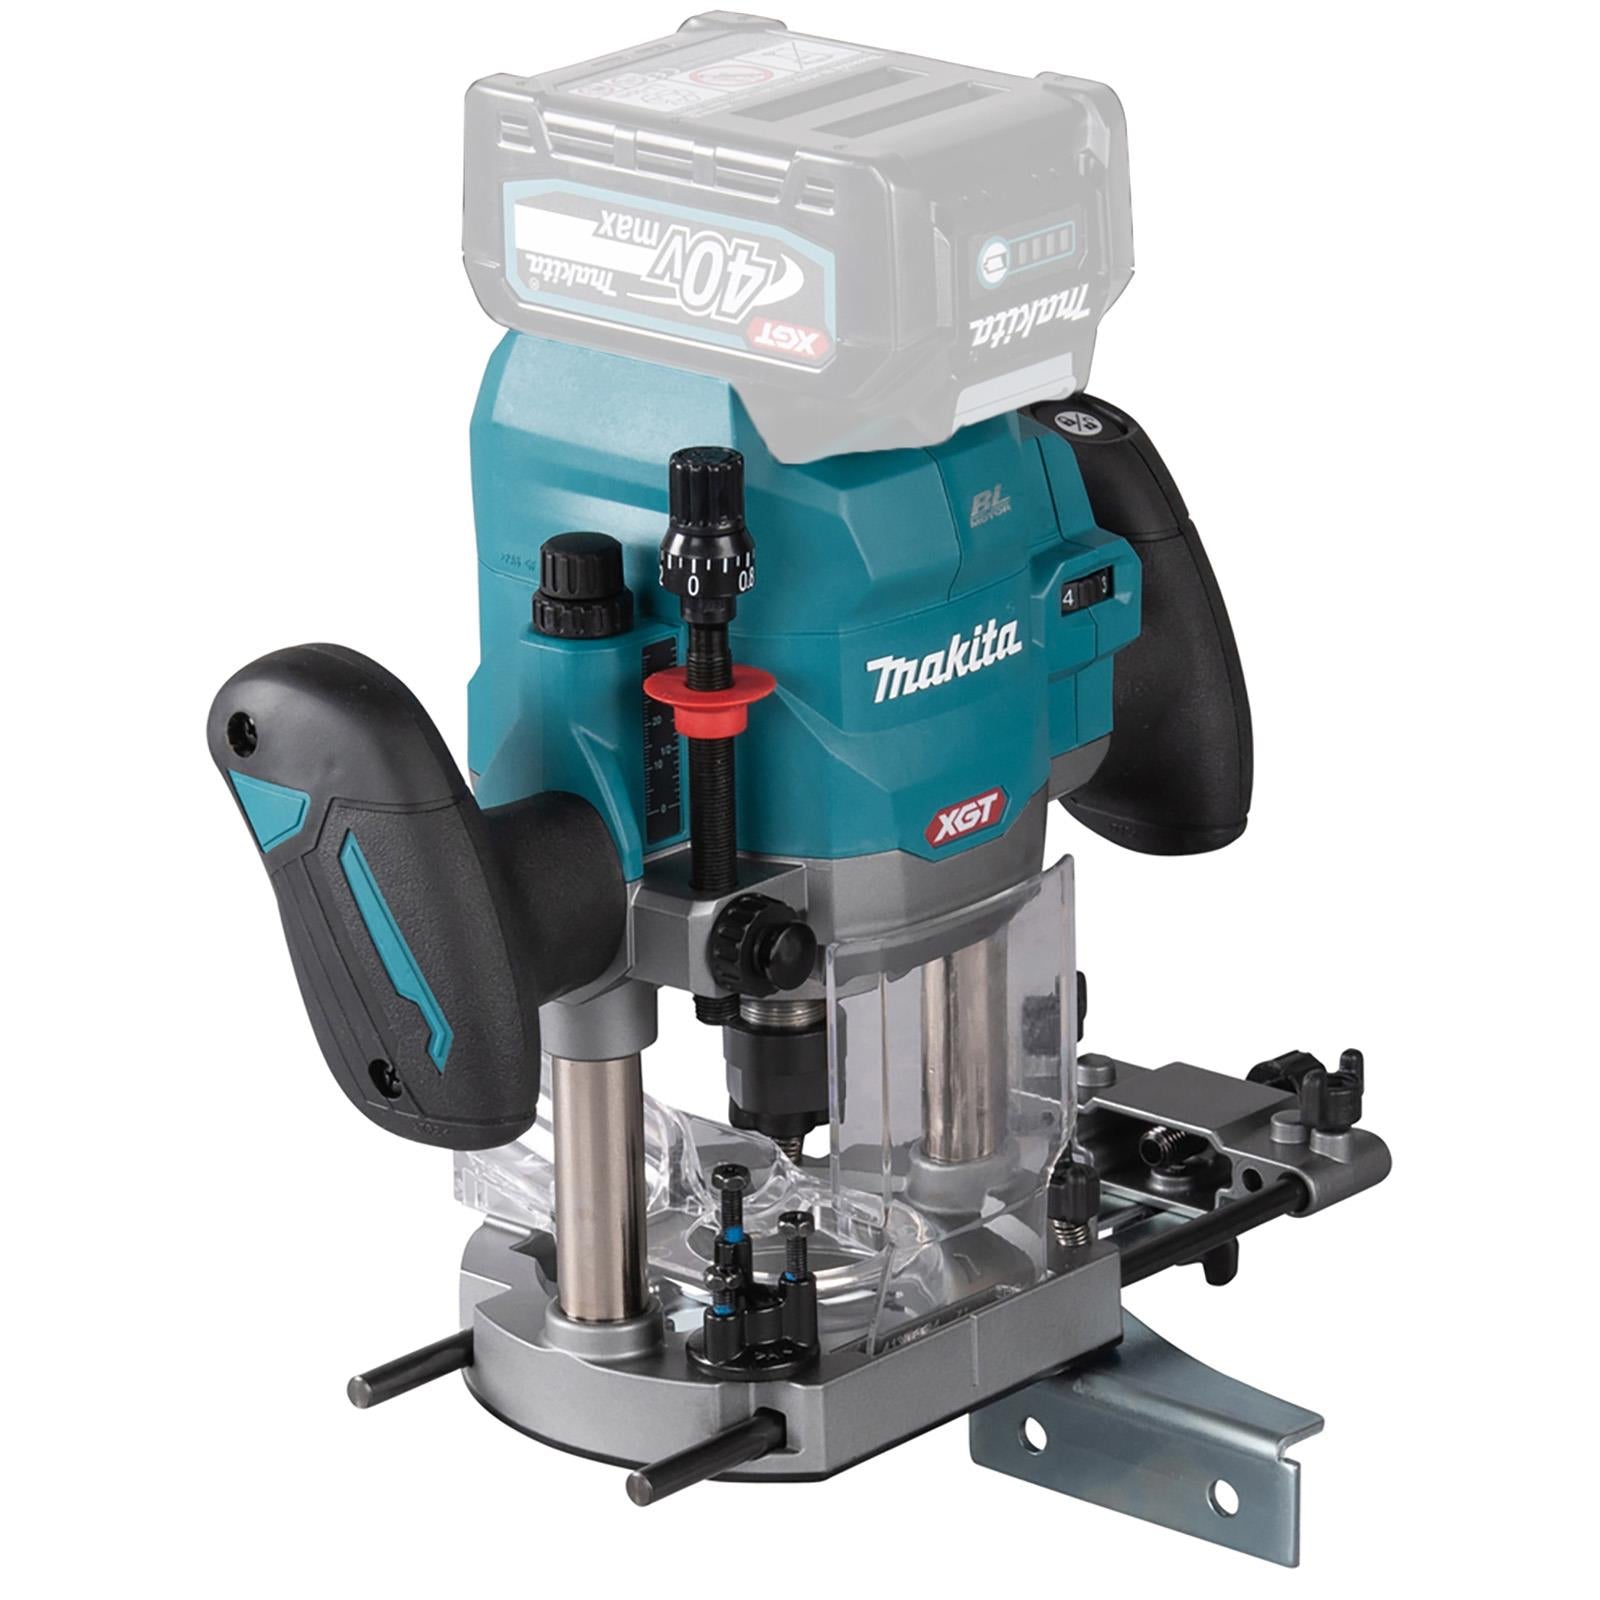 Makita Plunge Router Cordless 1/2" Collet Brushless XGT 40V Max In MakPac Type 4 Case Body Only RP001GZ02